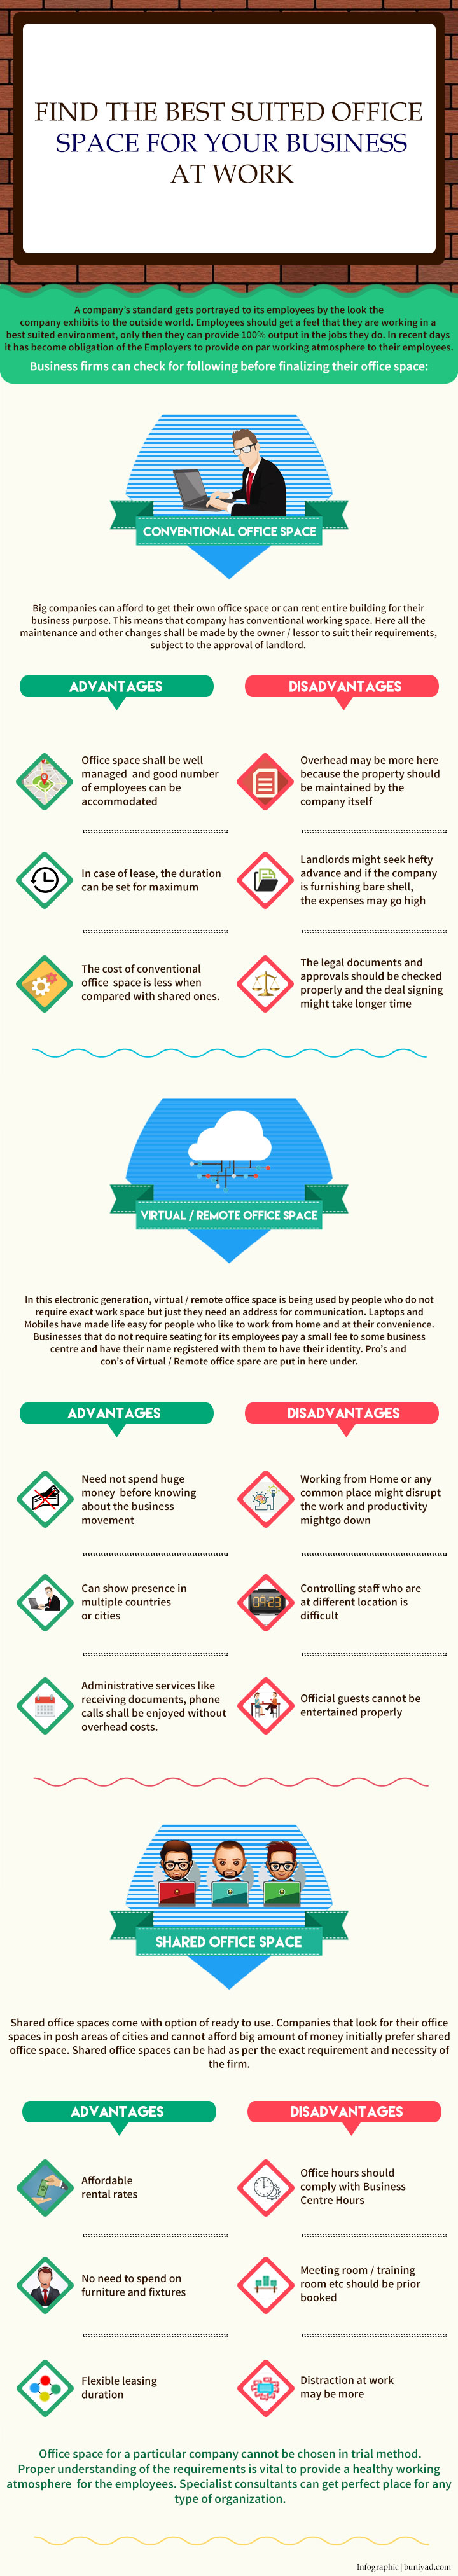 office-space-infograpic